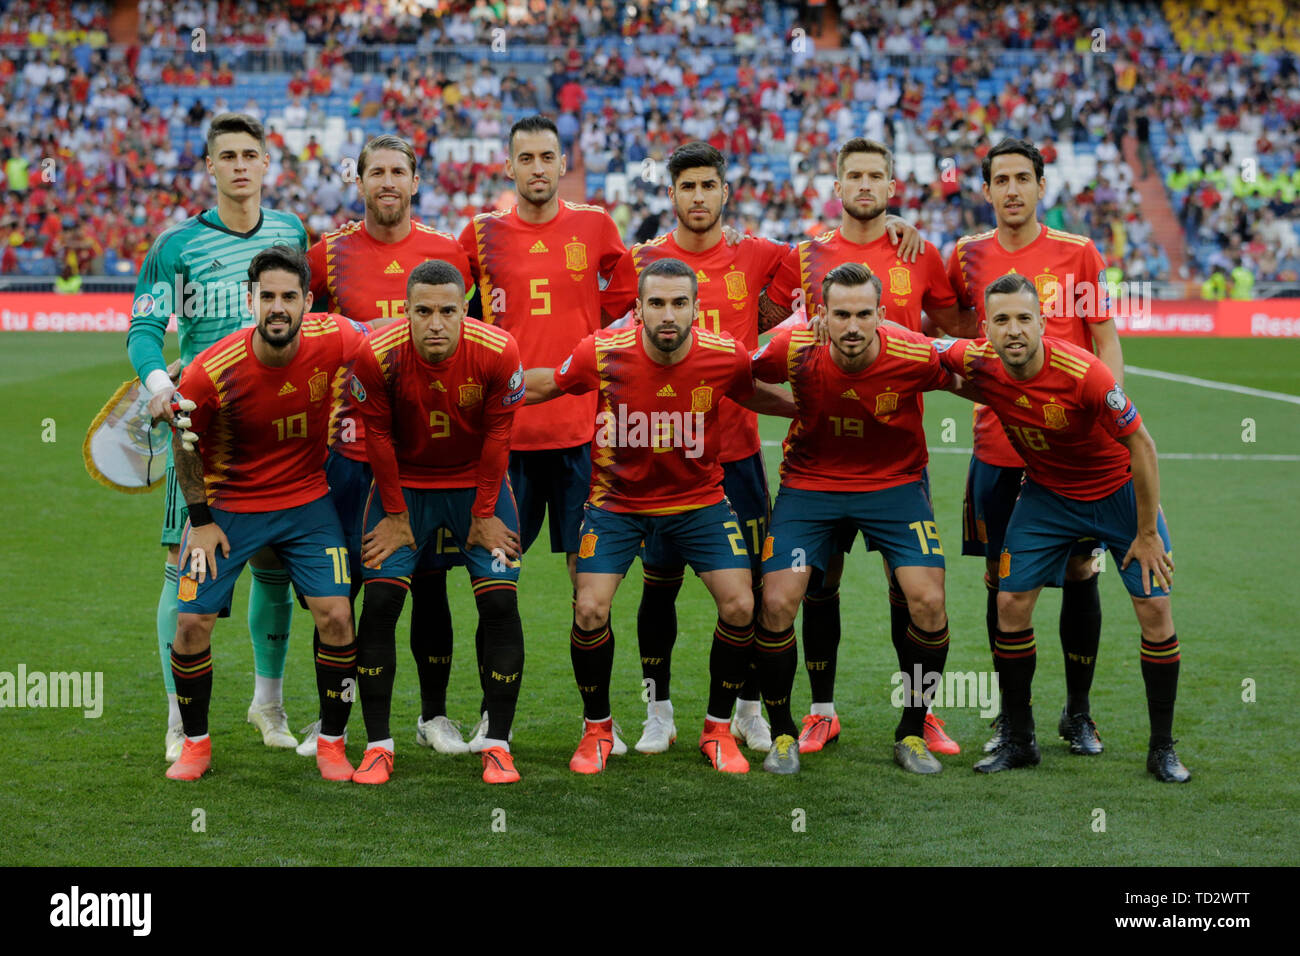 Spain national team pose for photo during the UEFA EURO 2020 Qualifier match between Spain and Sweden at Santiago Bernabeu Stadium in Madrid. Final score: Spain 3 - Sweden 0 Stock Photo